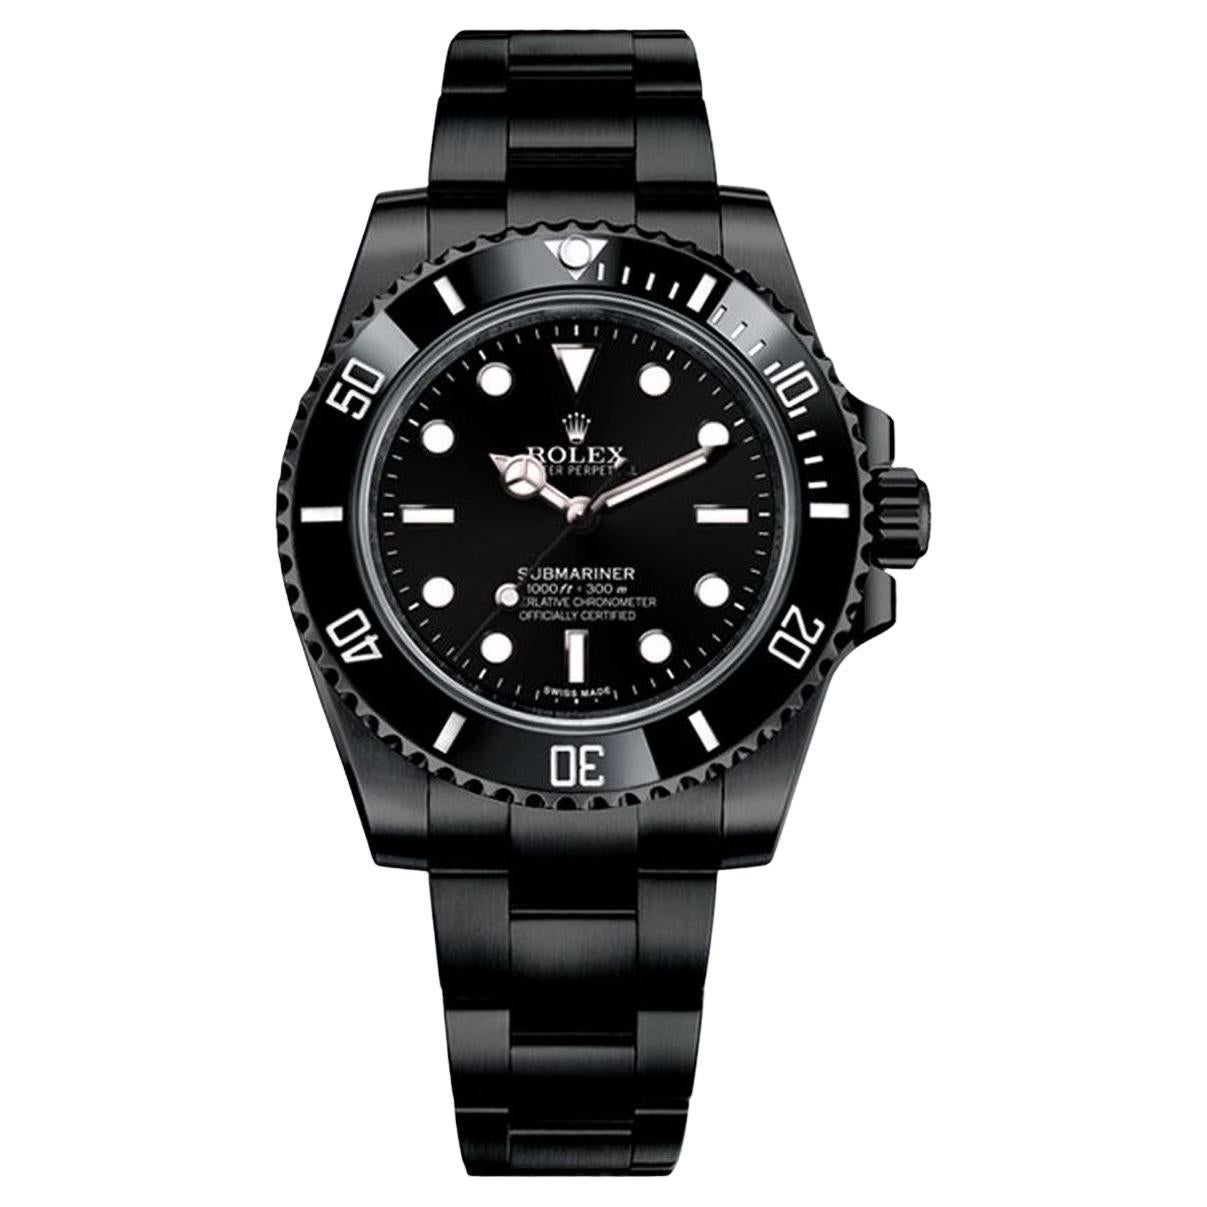 Rolex Submariner (No Date) Black PVD/DLC Coated Stainless Steel Watch 114060 For Sale